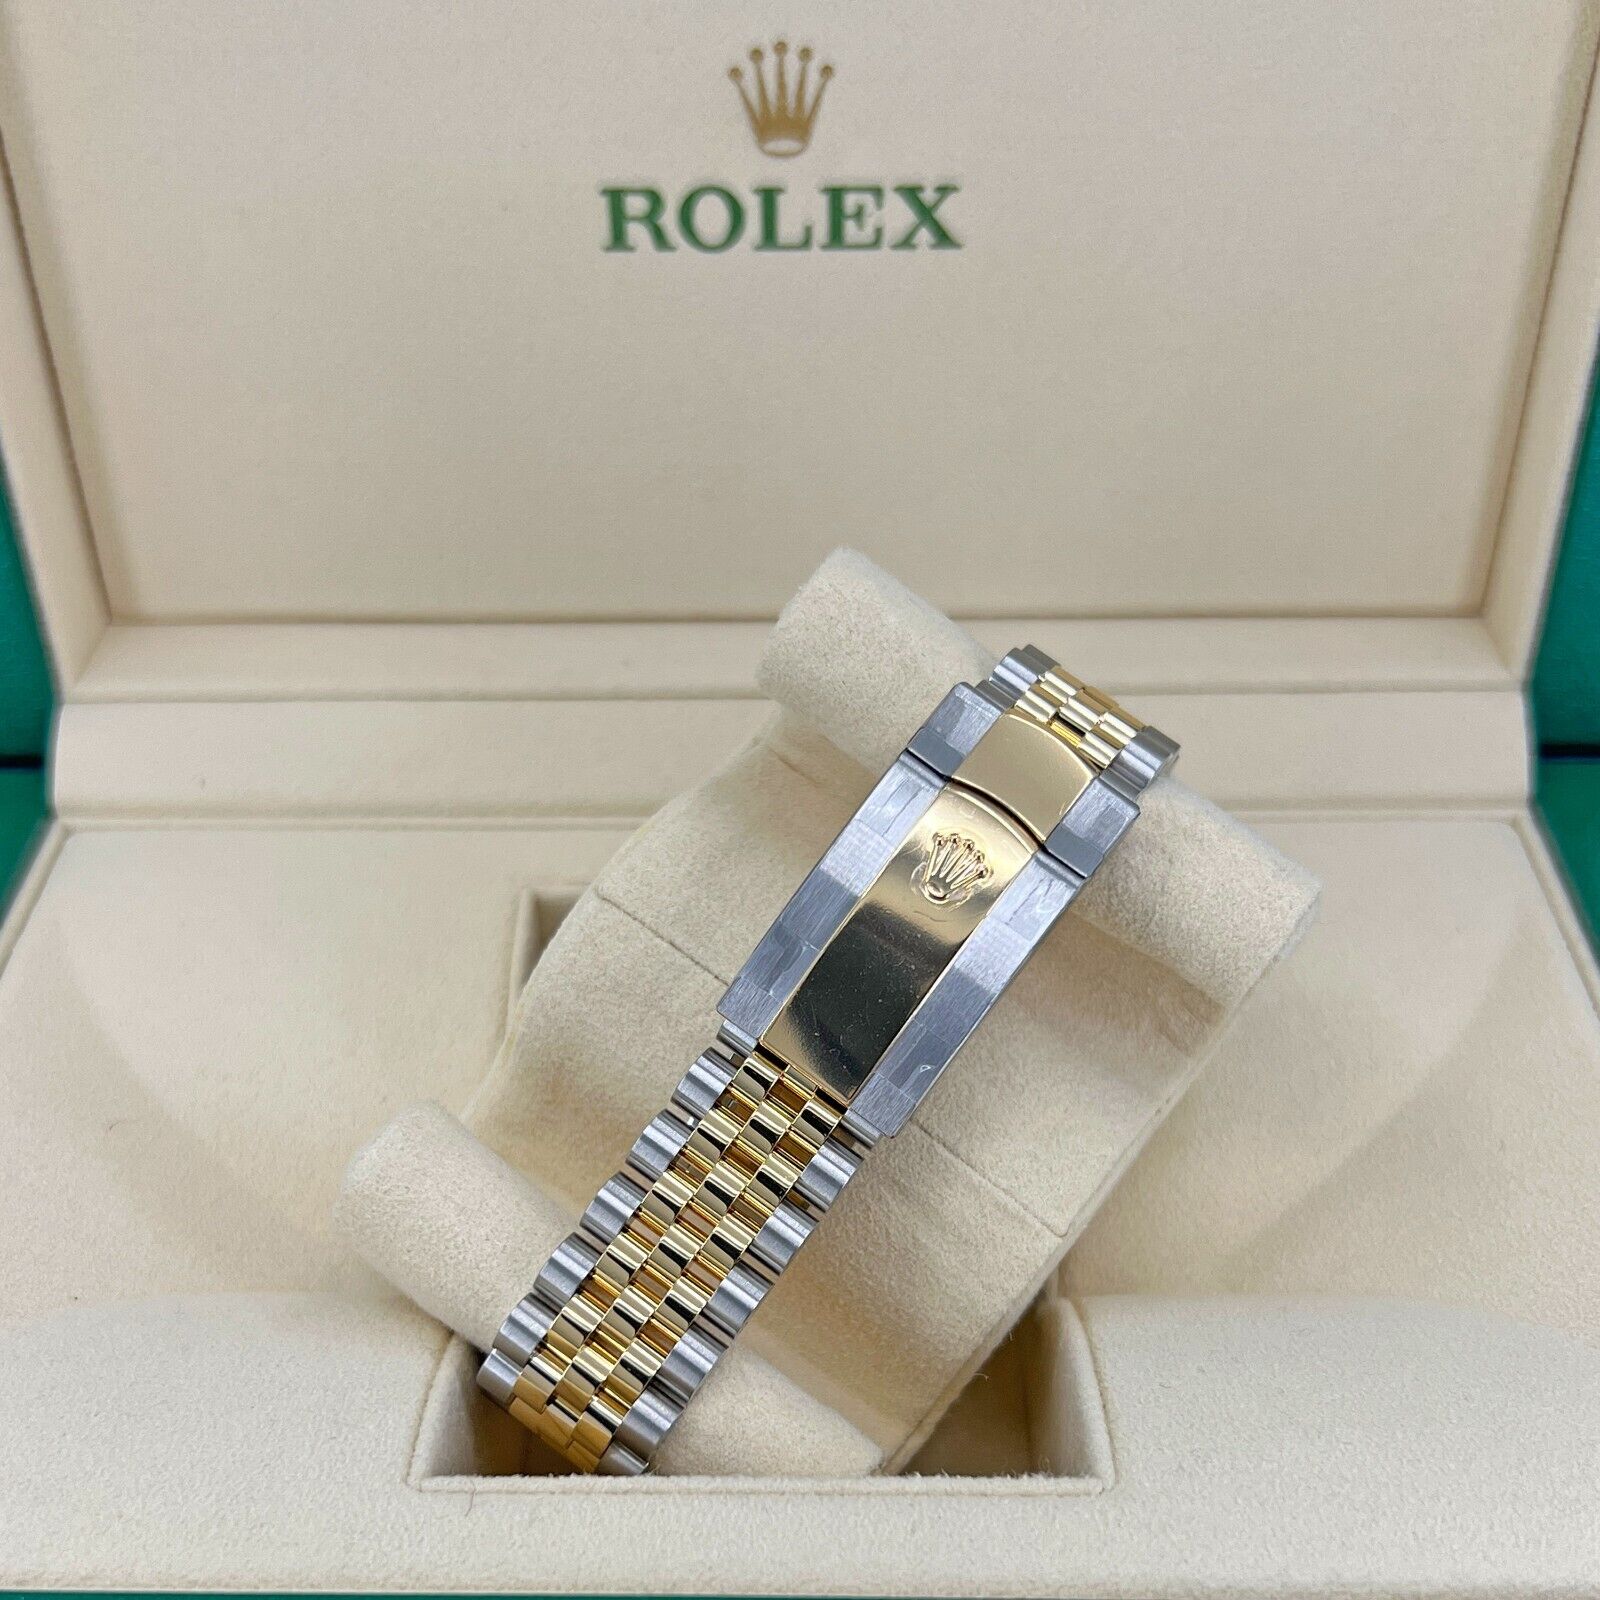 Rolex Datejust 36, 18k Yellow Gold and Stainless Steel, 36mm, Golden, palm motif dial, Ref# 126233-0037, Clasp 1